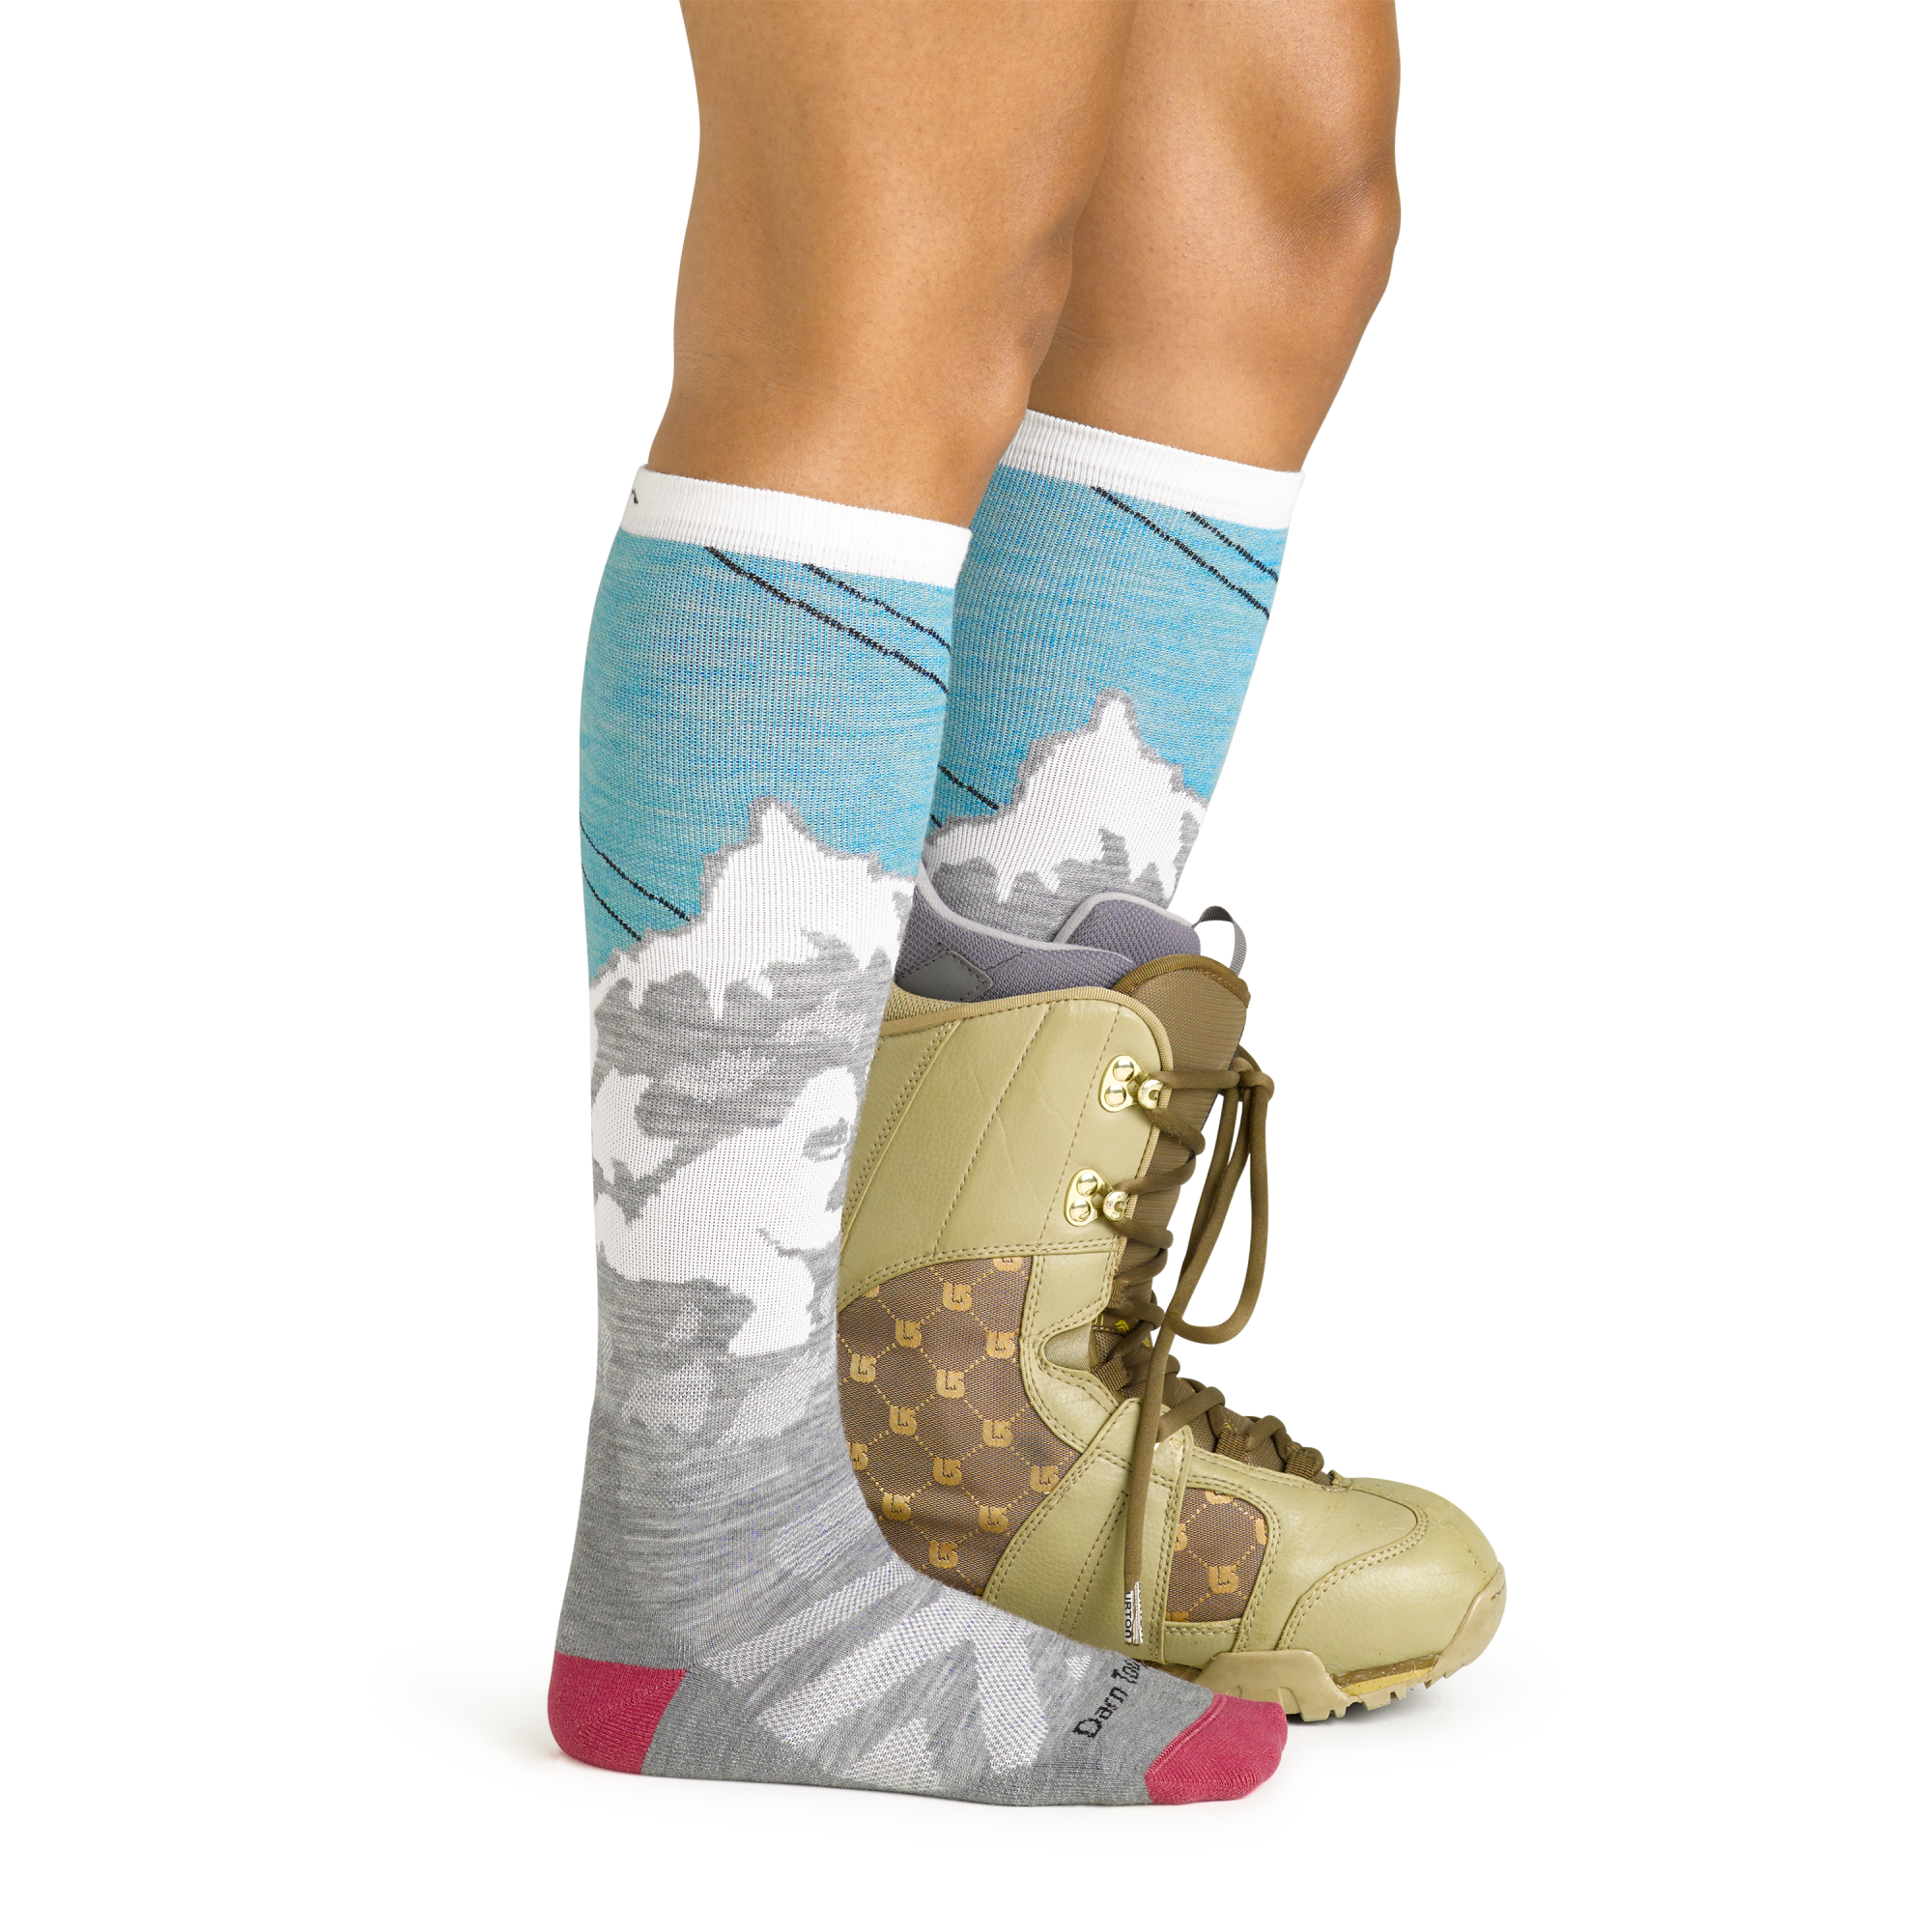 Side studio shot of model wearing women's yeti over-the-calf snow sock in aqua with green snowboard boot on left foot